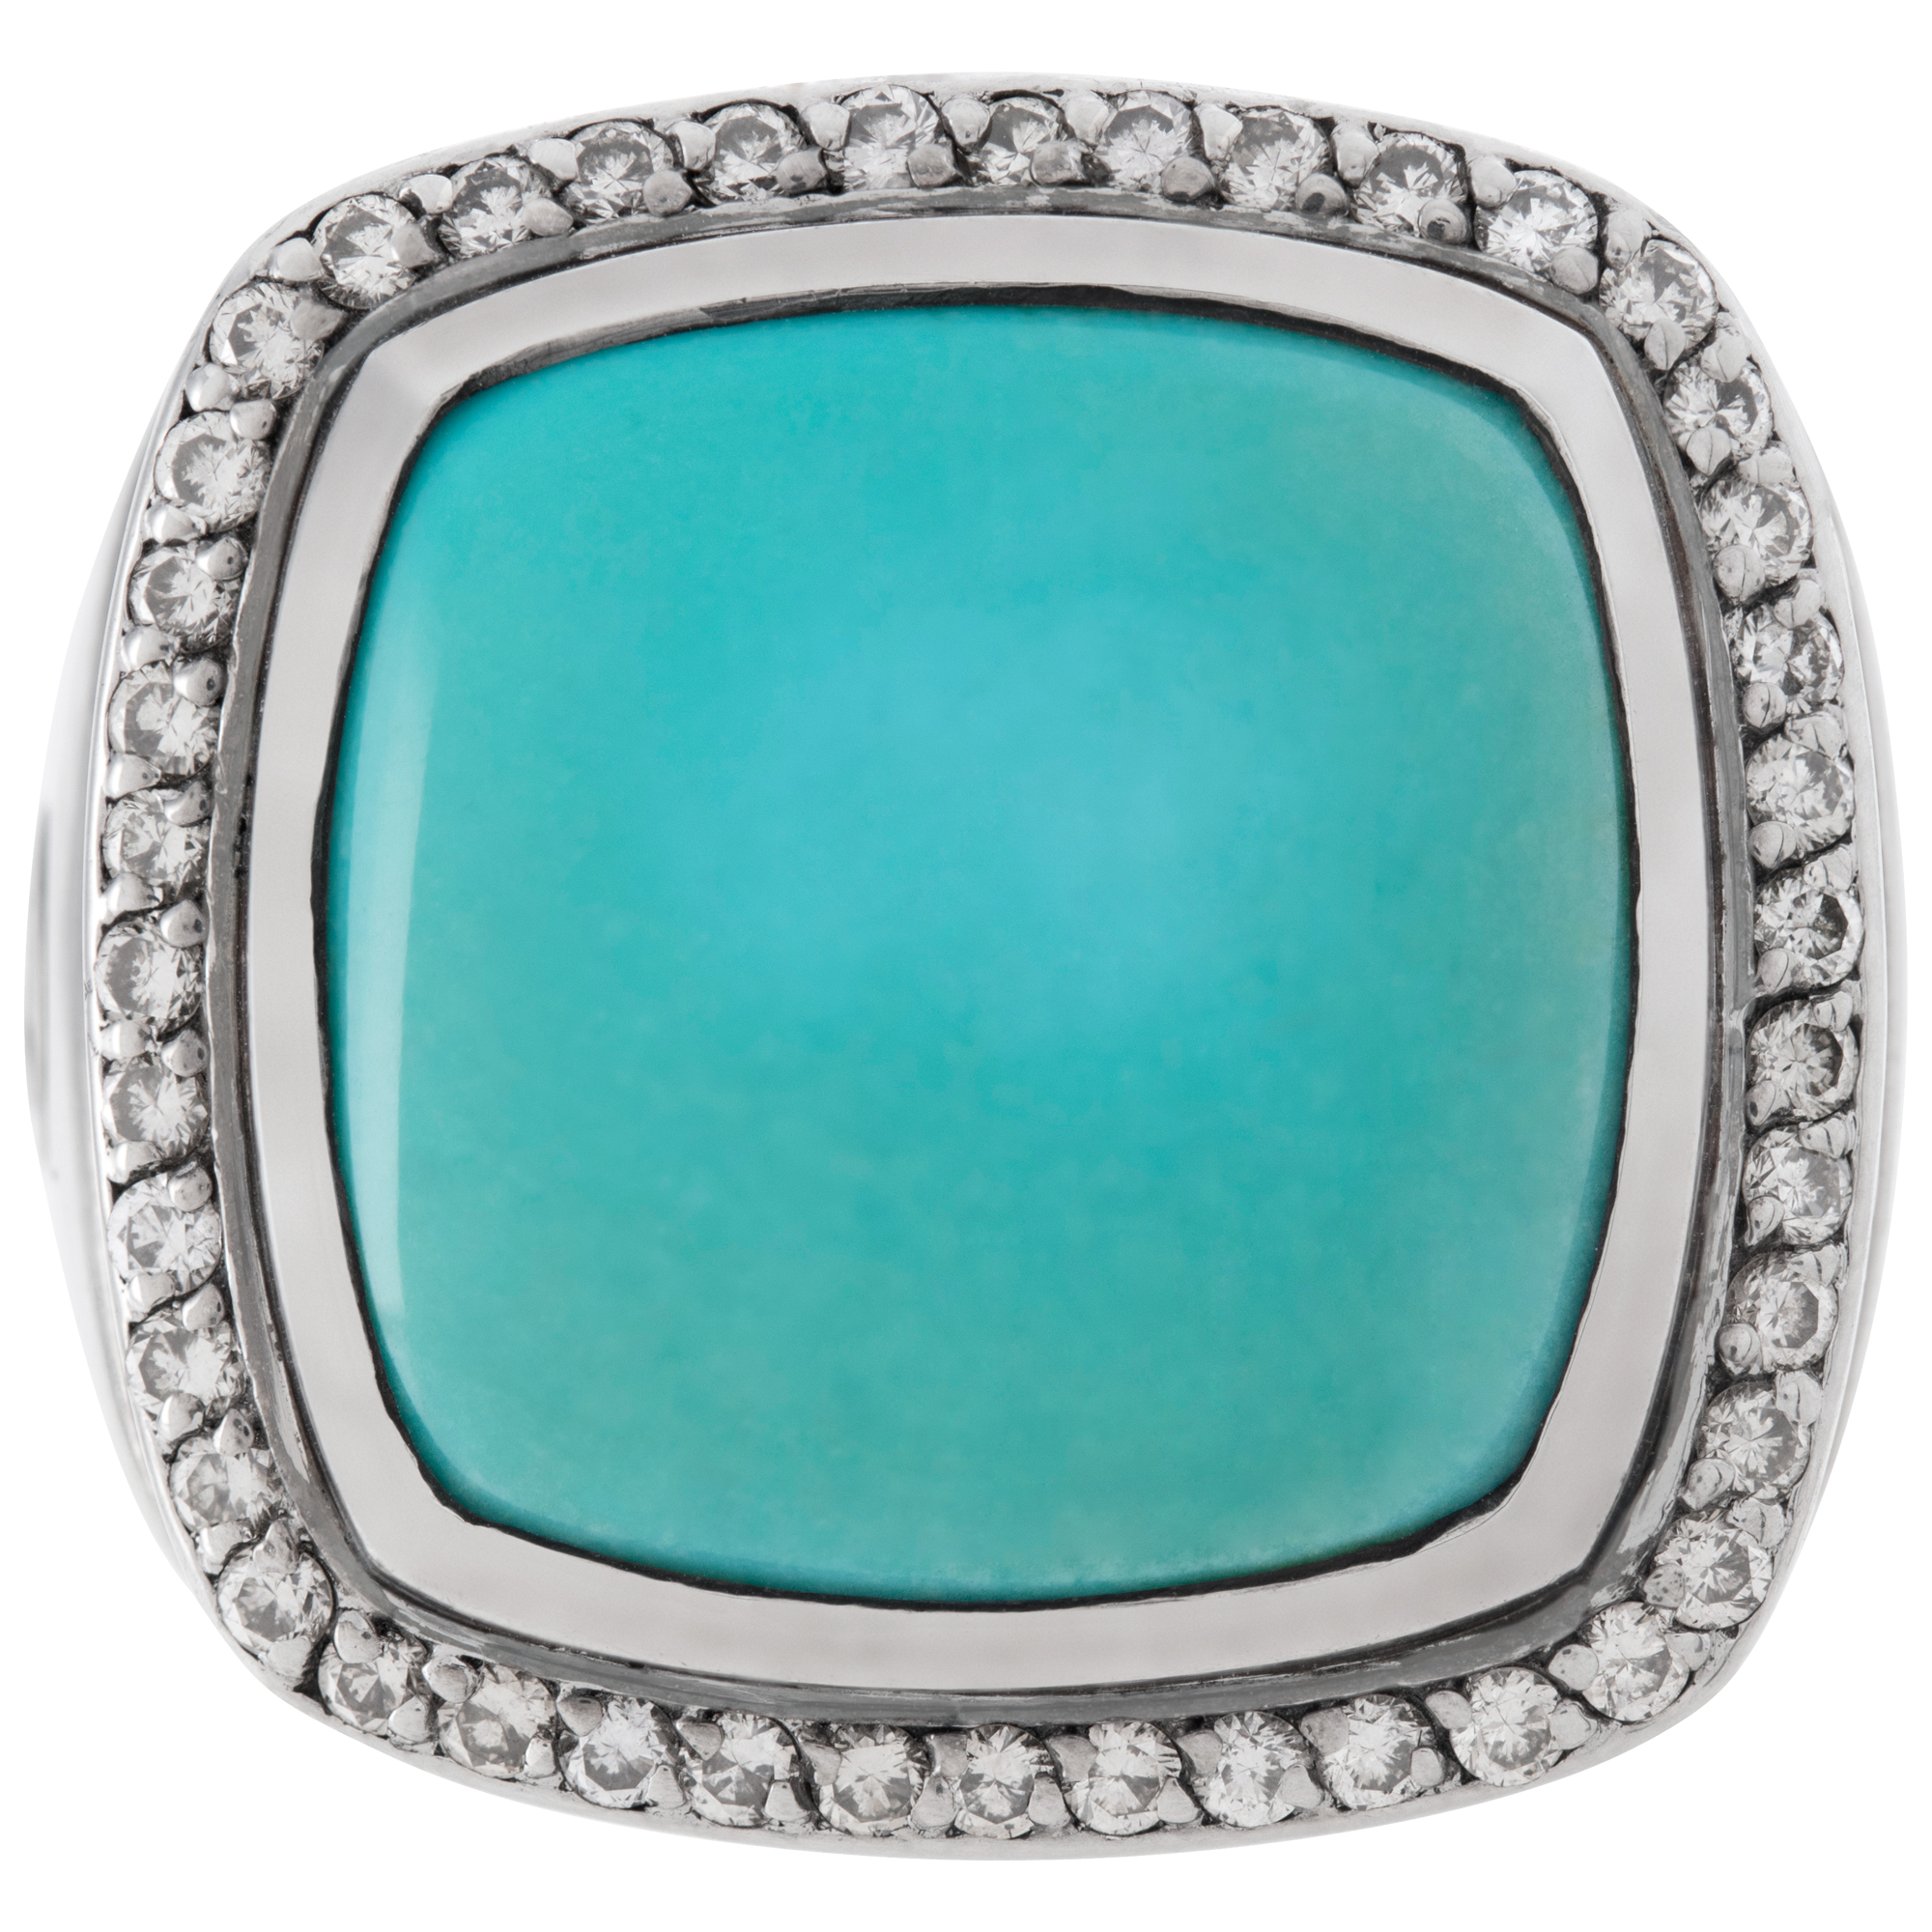 David Yurman Turquoise Albion ring in sterling silver ring with diamond accents image 2